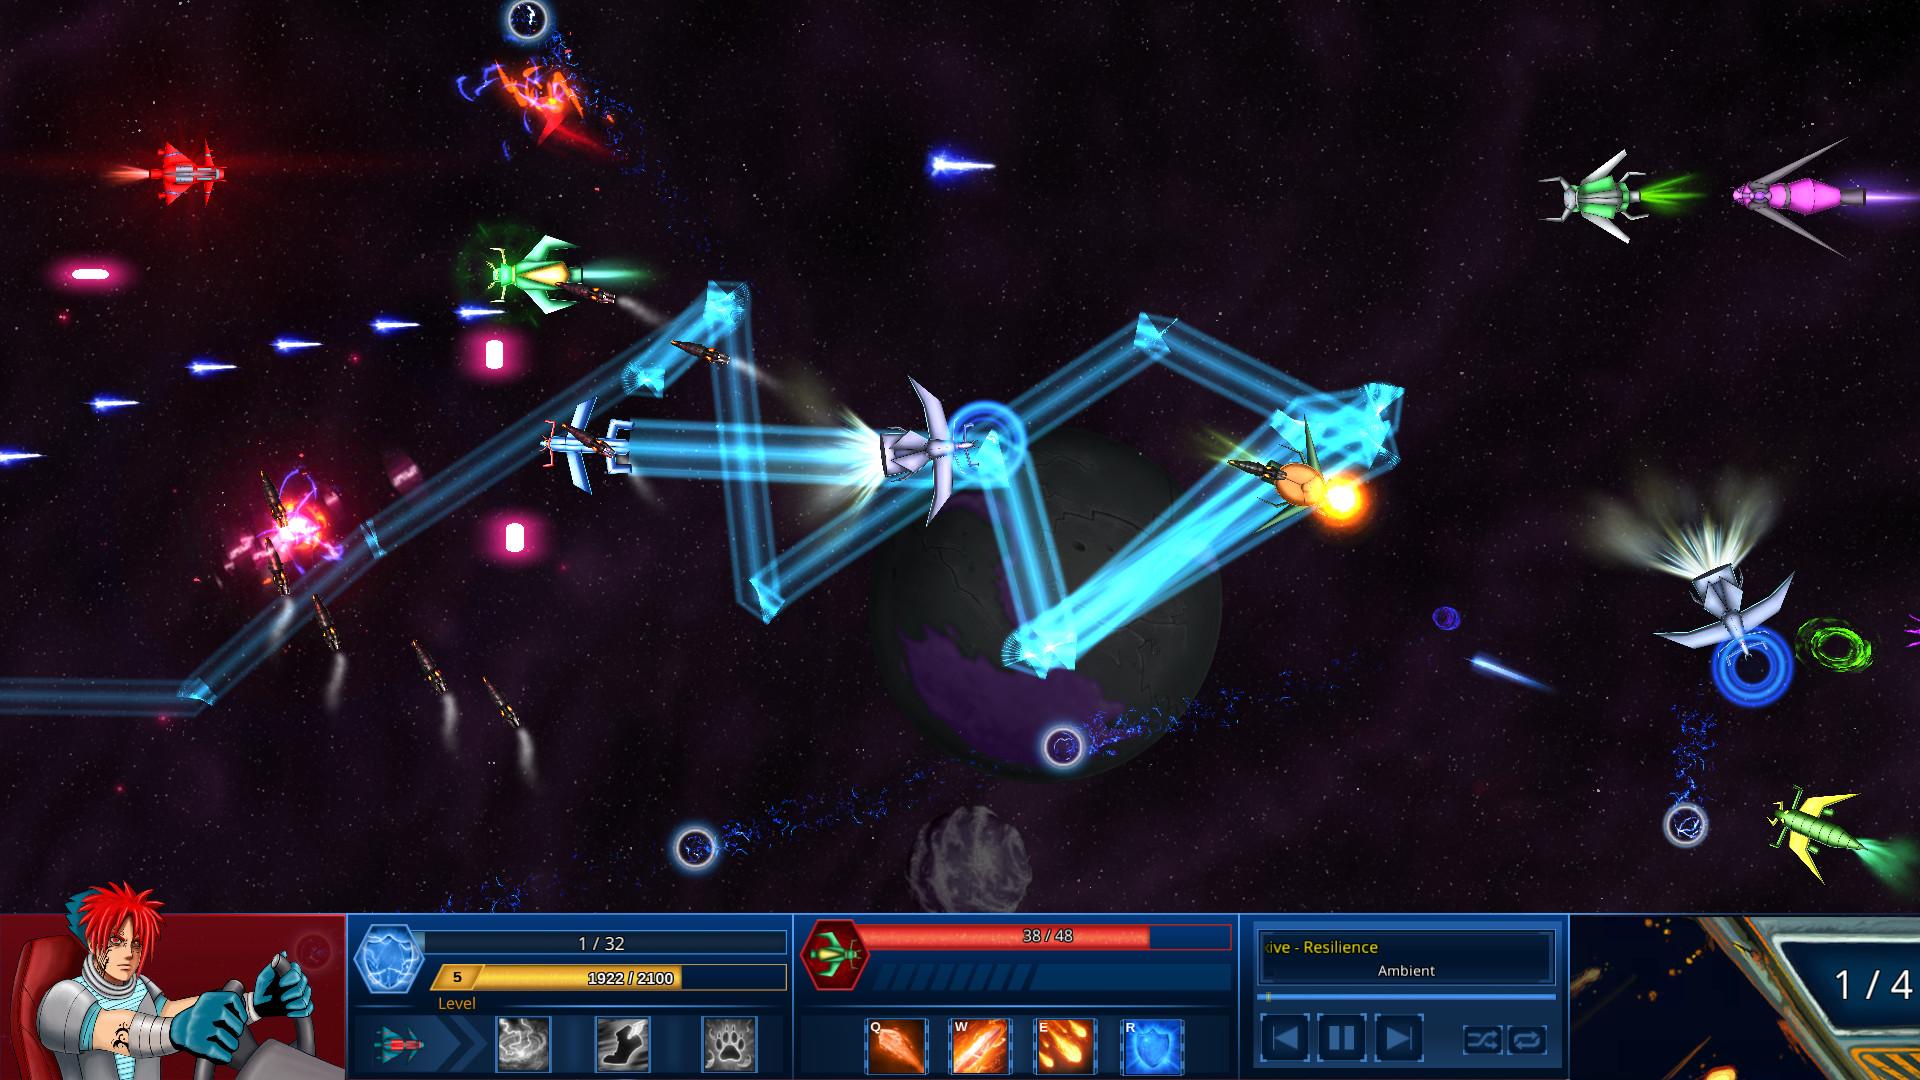 Screenshot №27 from game Survive in Space